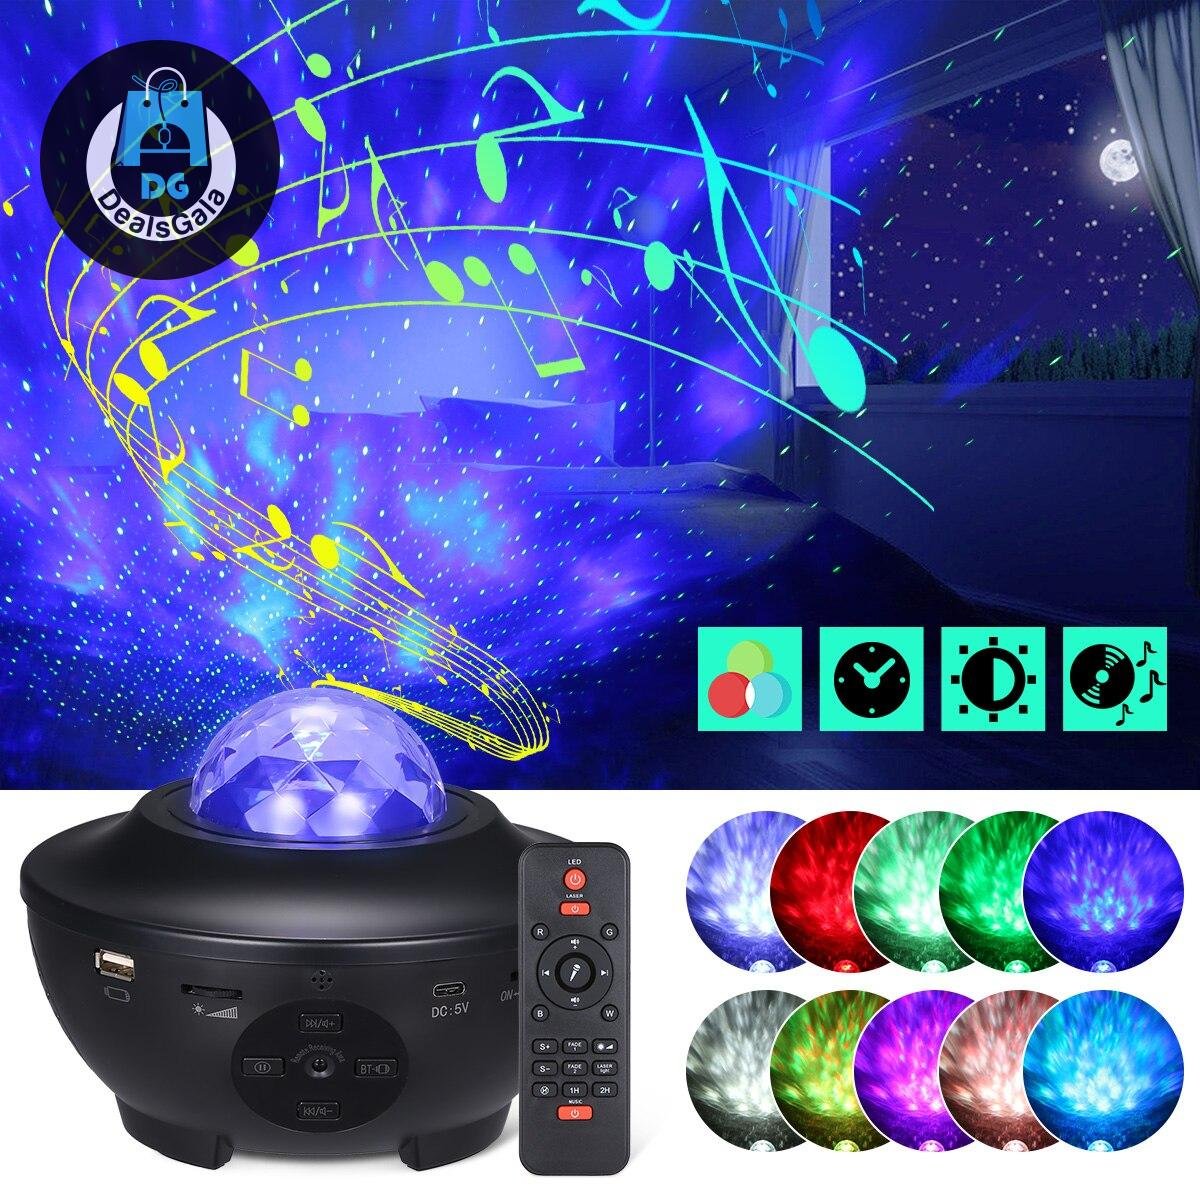 USB LED Star Night Light Music Starry Water Wave LED Projector Light BT Projector Remote Control Projector Light Deco night lamp 1ef722433d607dd9d2b8b7: China|United States